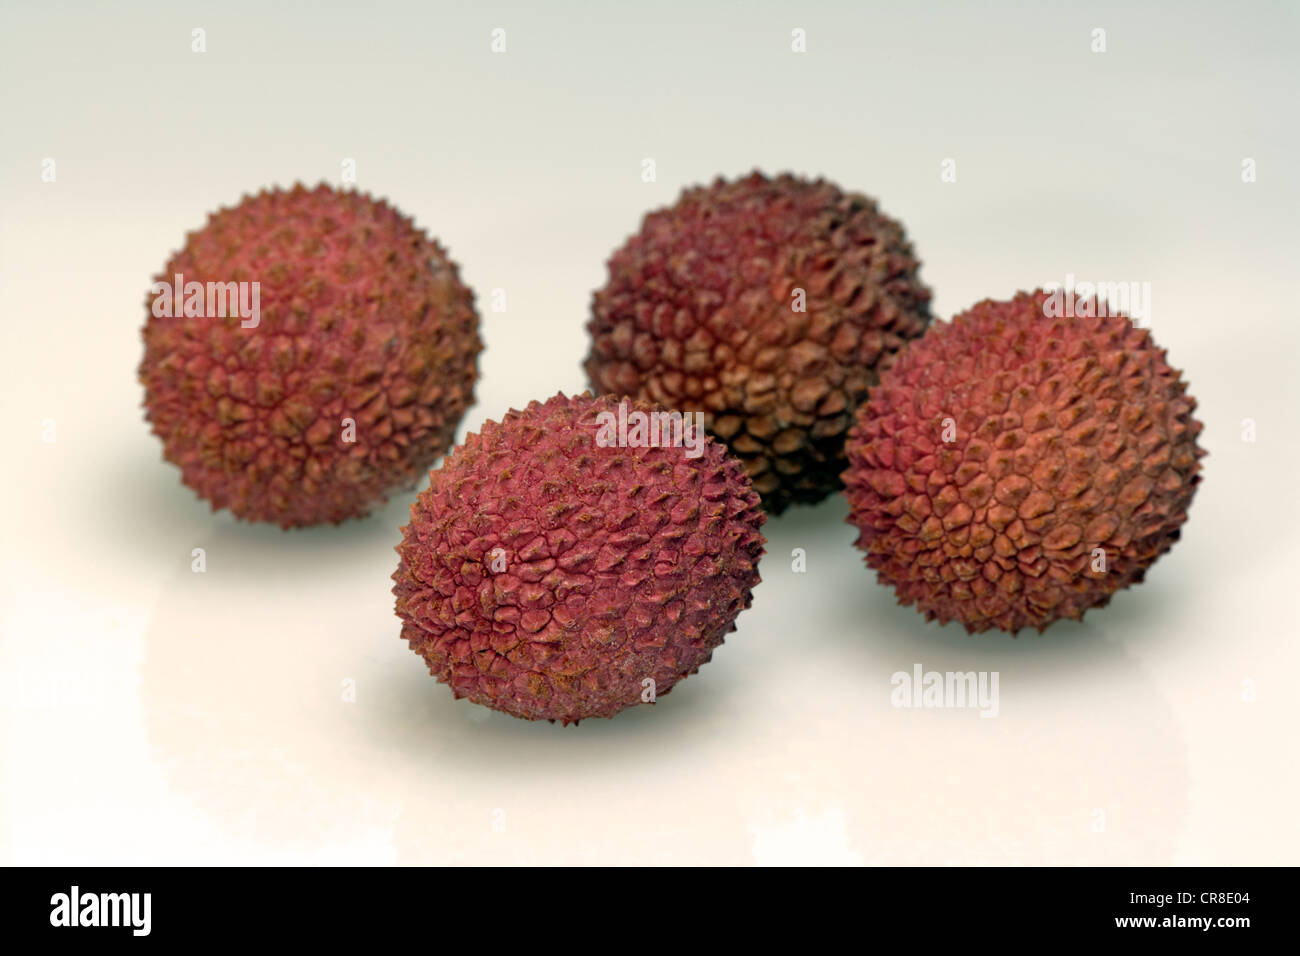 Litchies or lychees (Litchi chinensis) Stock Photo